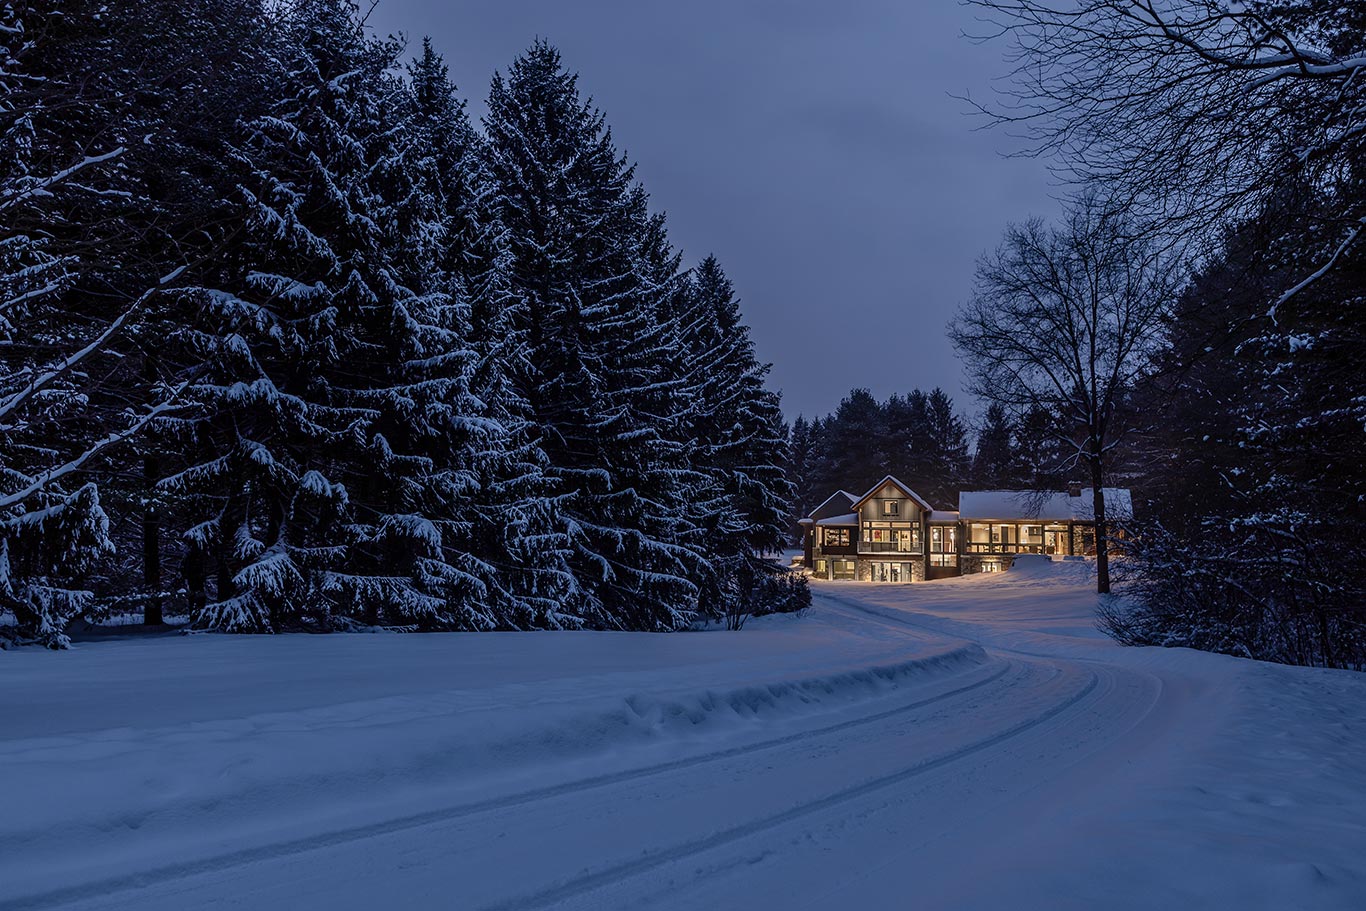 The home as viewed from the driveway on a wintry night